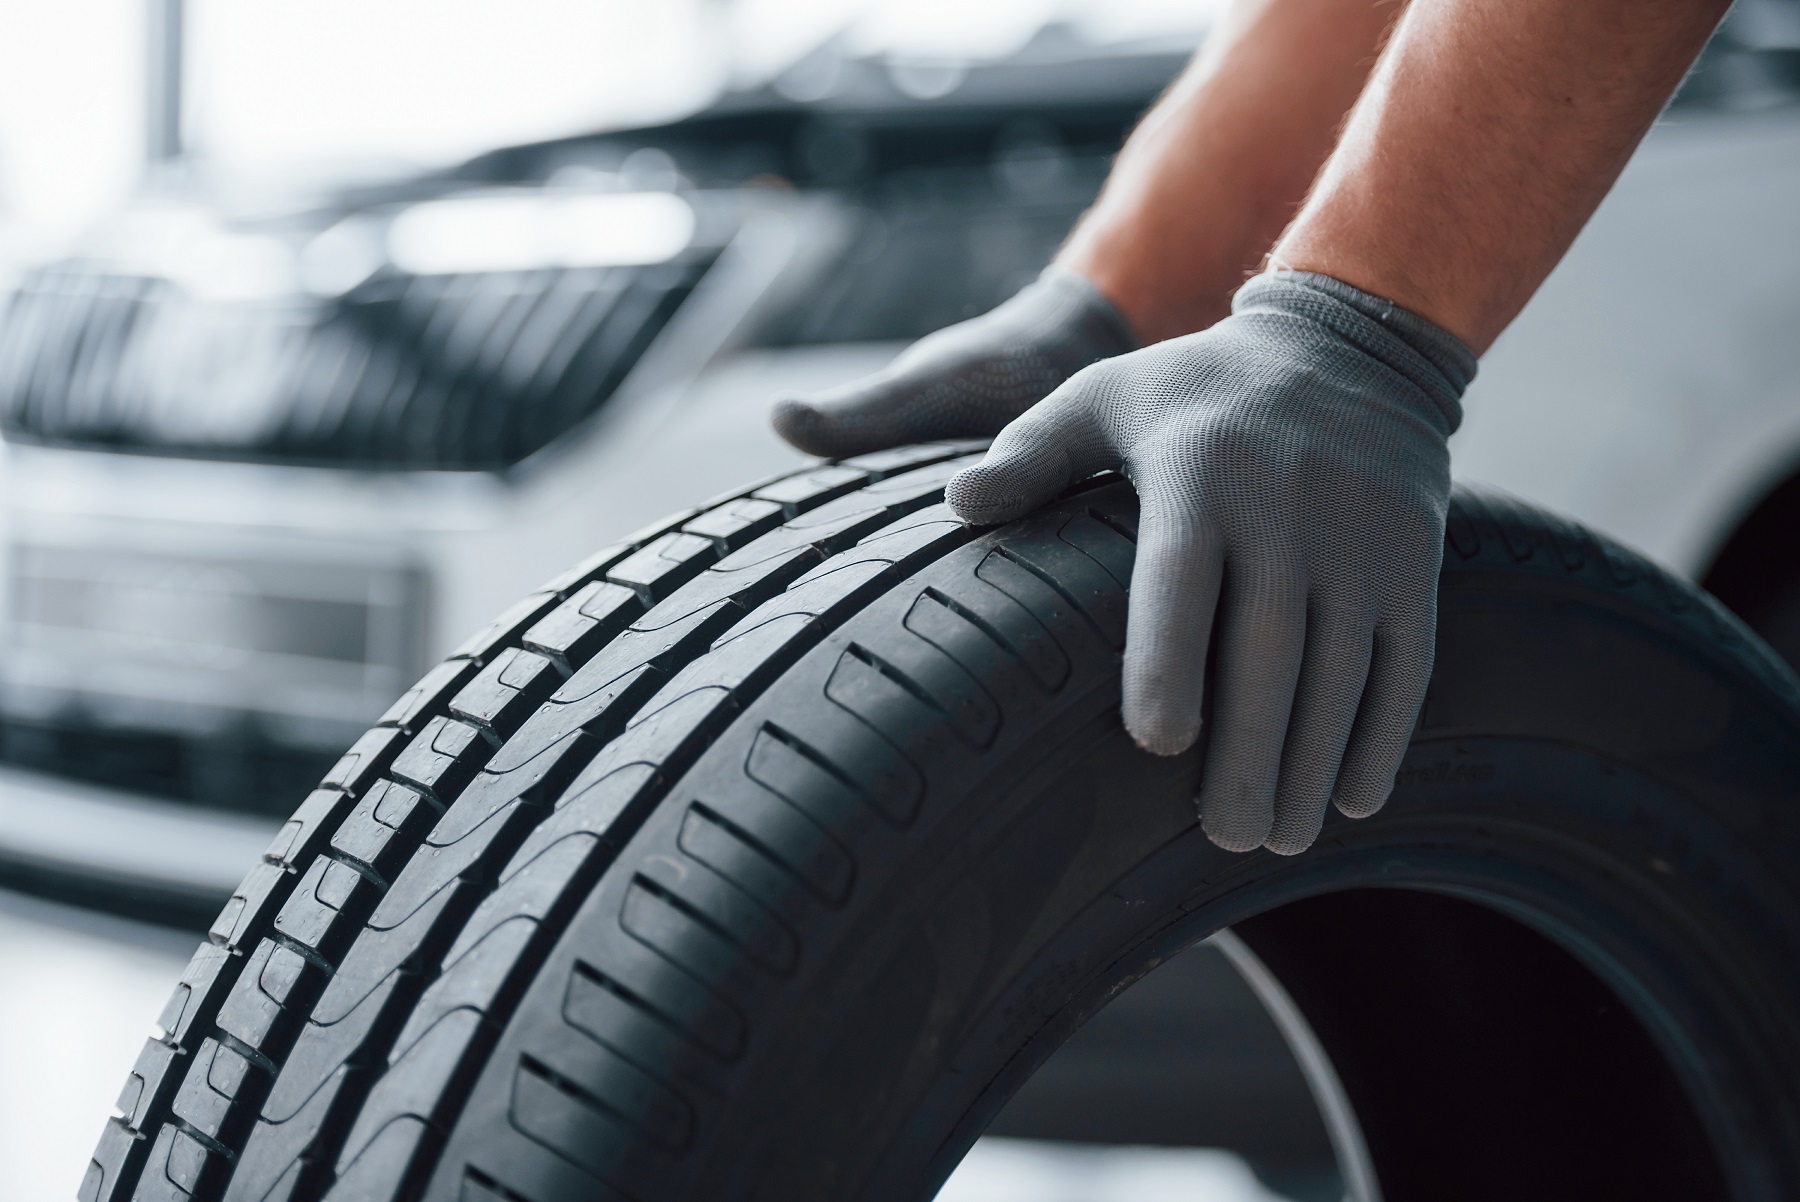 What To Consider Before Choosing A Local Tyre Fitter, Tyre Fitting, Car Tips, New Tyres, Mechanic, Car Fitting, the Frenchie Mummy, Daily Commute